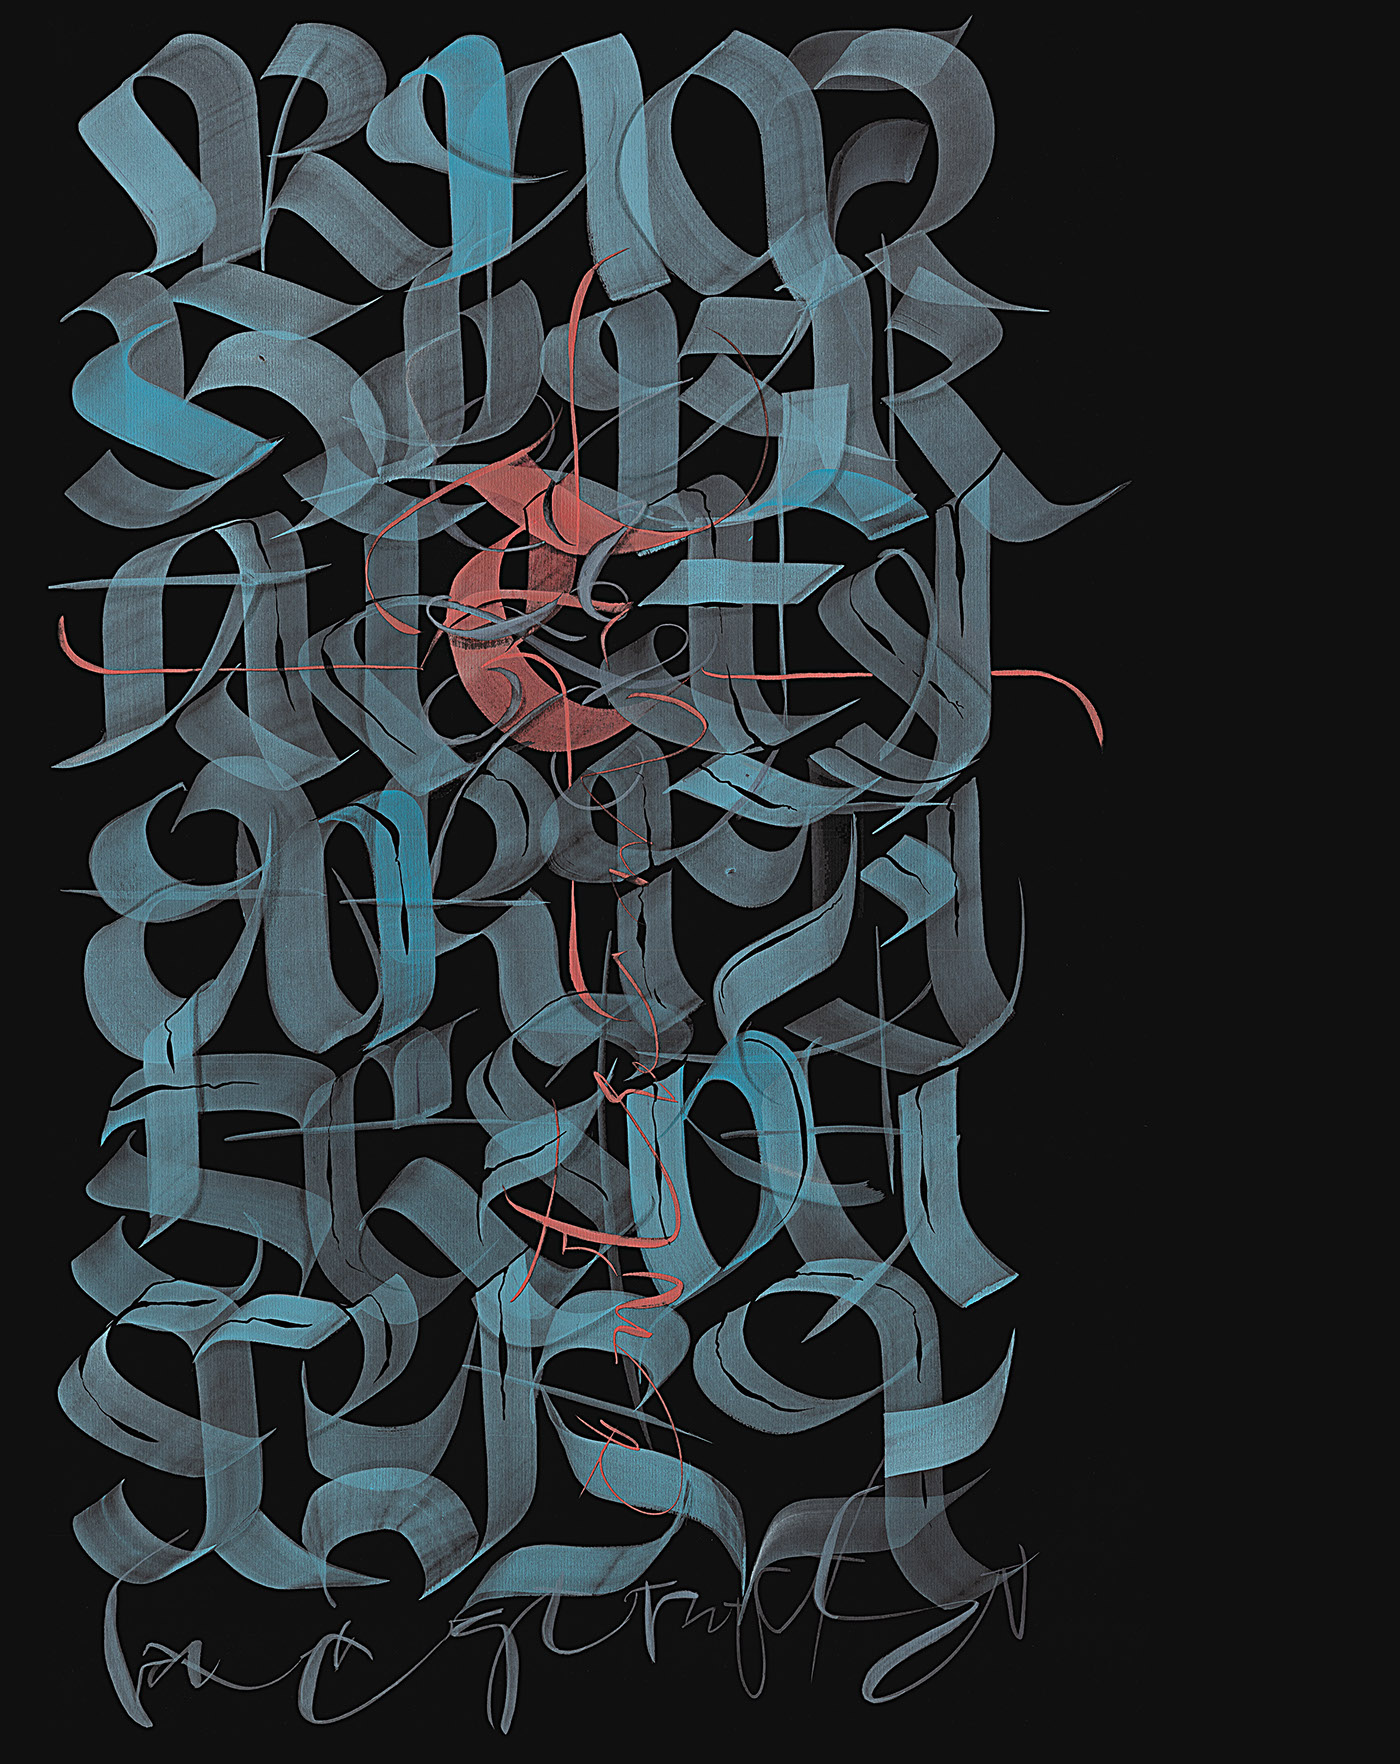 Calligraplhy Blackletter gestural brush DUCTUS #calligraphymasters